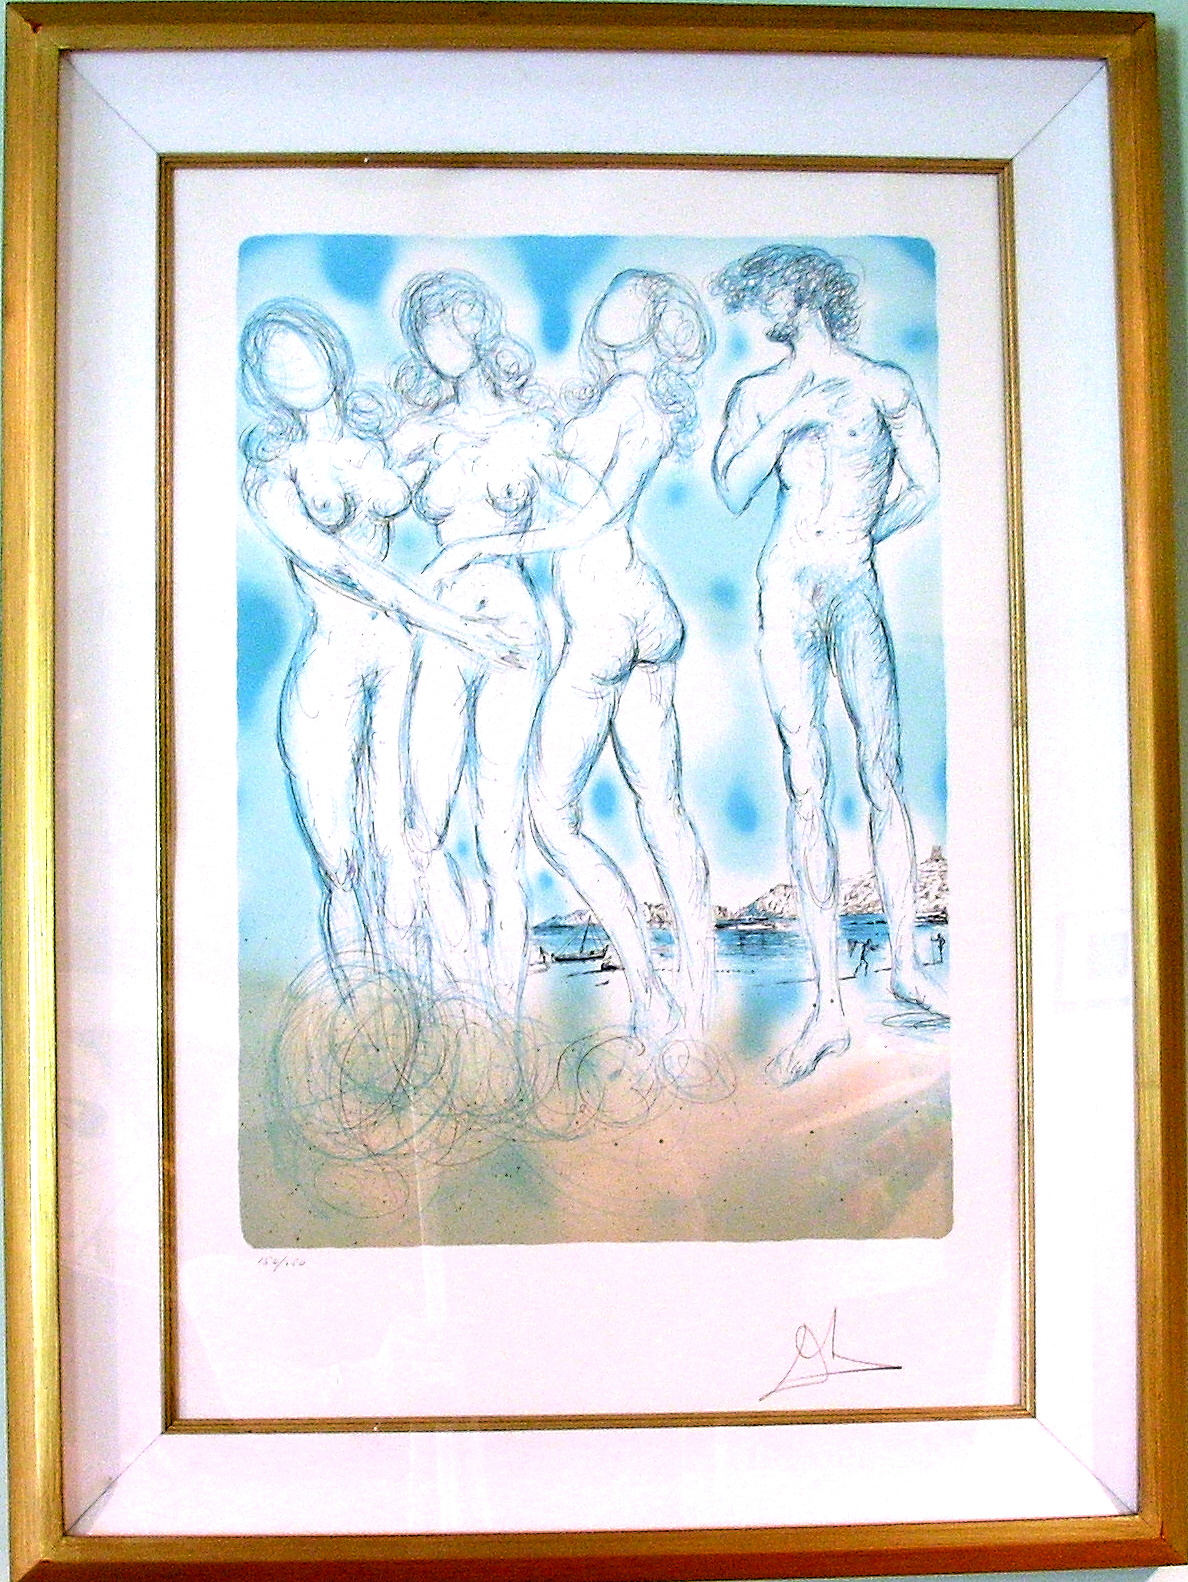 The Mythology – Judgment of Paris by Salvador Dali | Lithograph